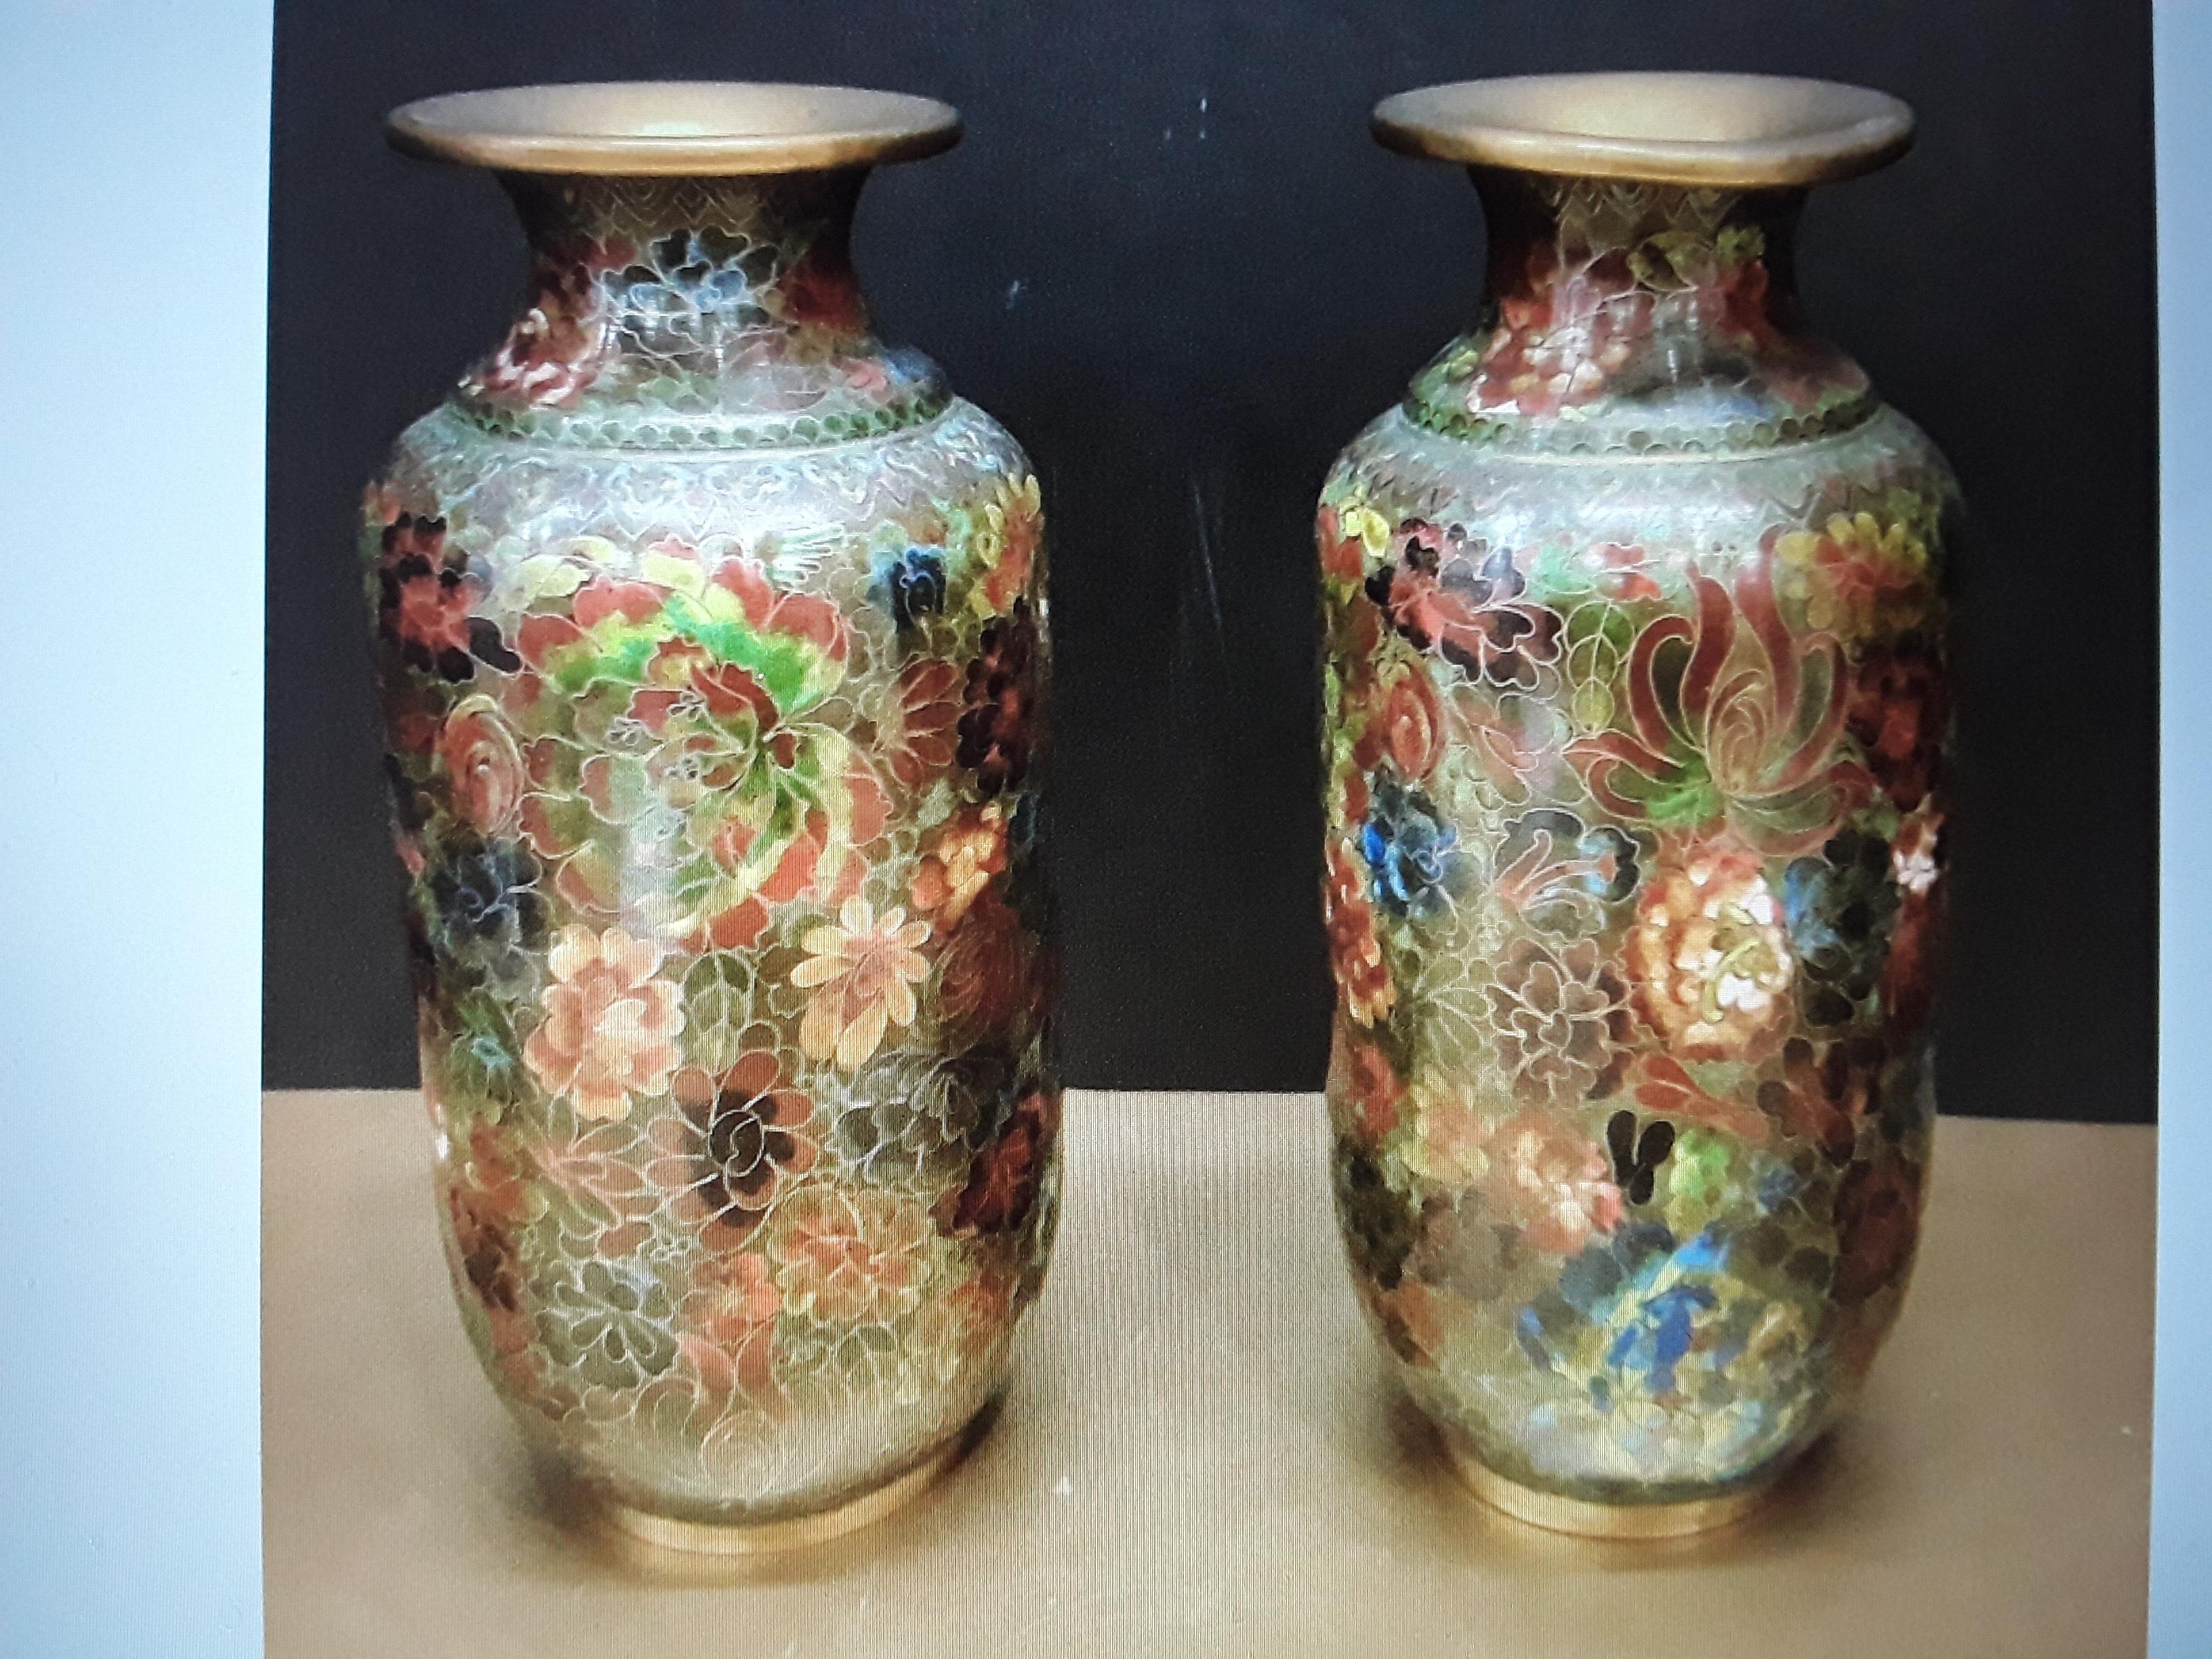 A Stunning Pair of Antique Asian Cloissone Vase. Green earthy tones. Beautiful pair with one very small not noticeable dent. Not detracting in the least.